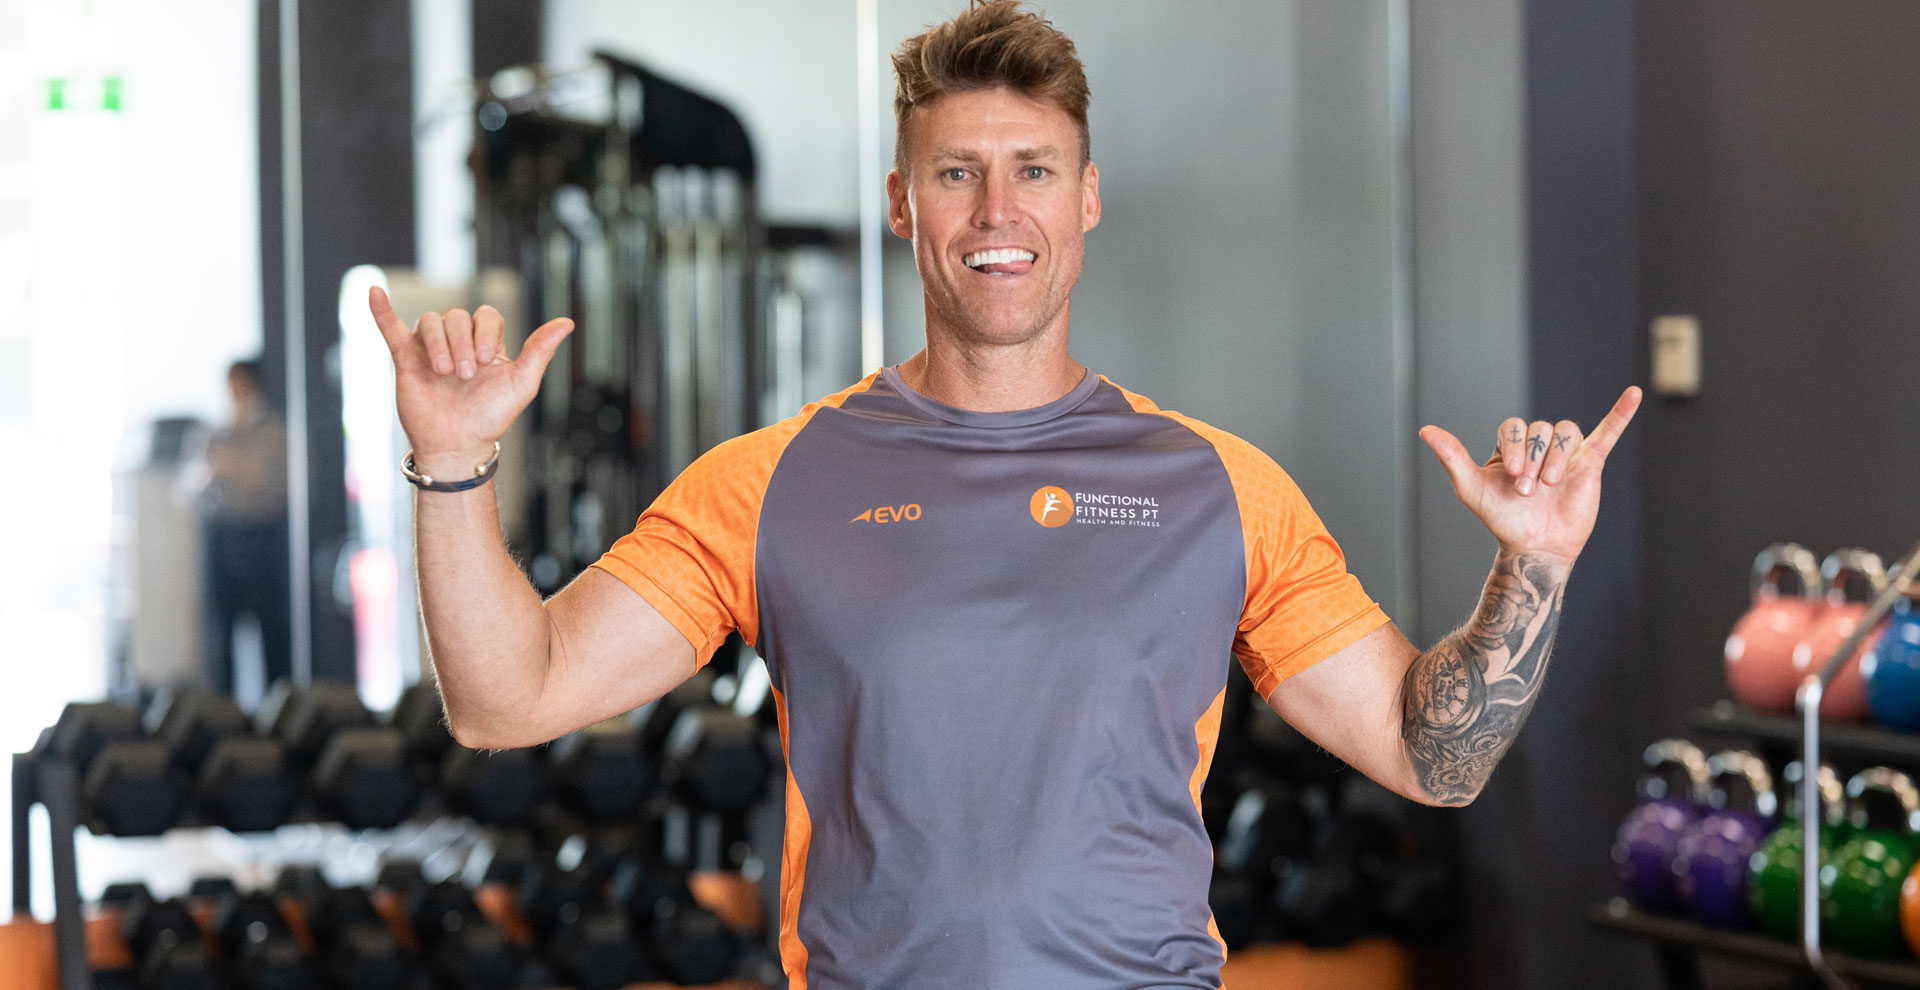 Personal trainer Lutwyche